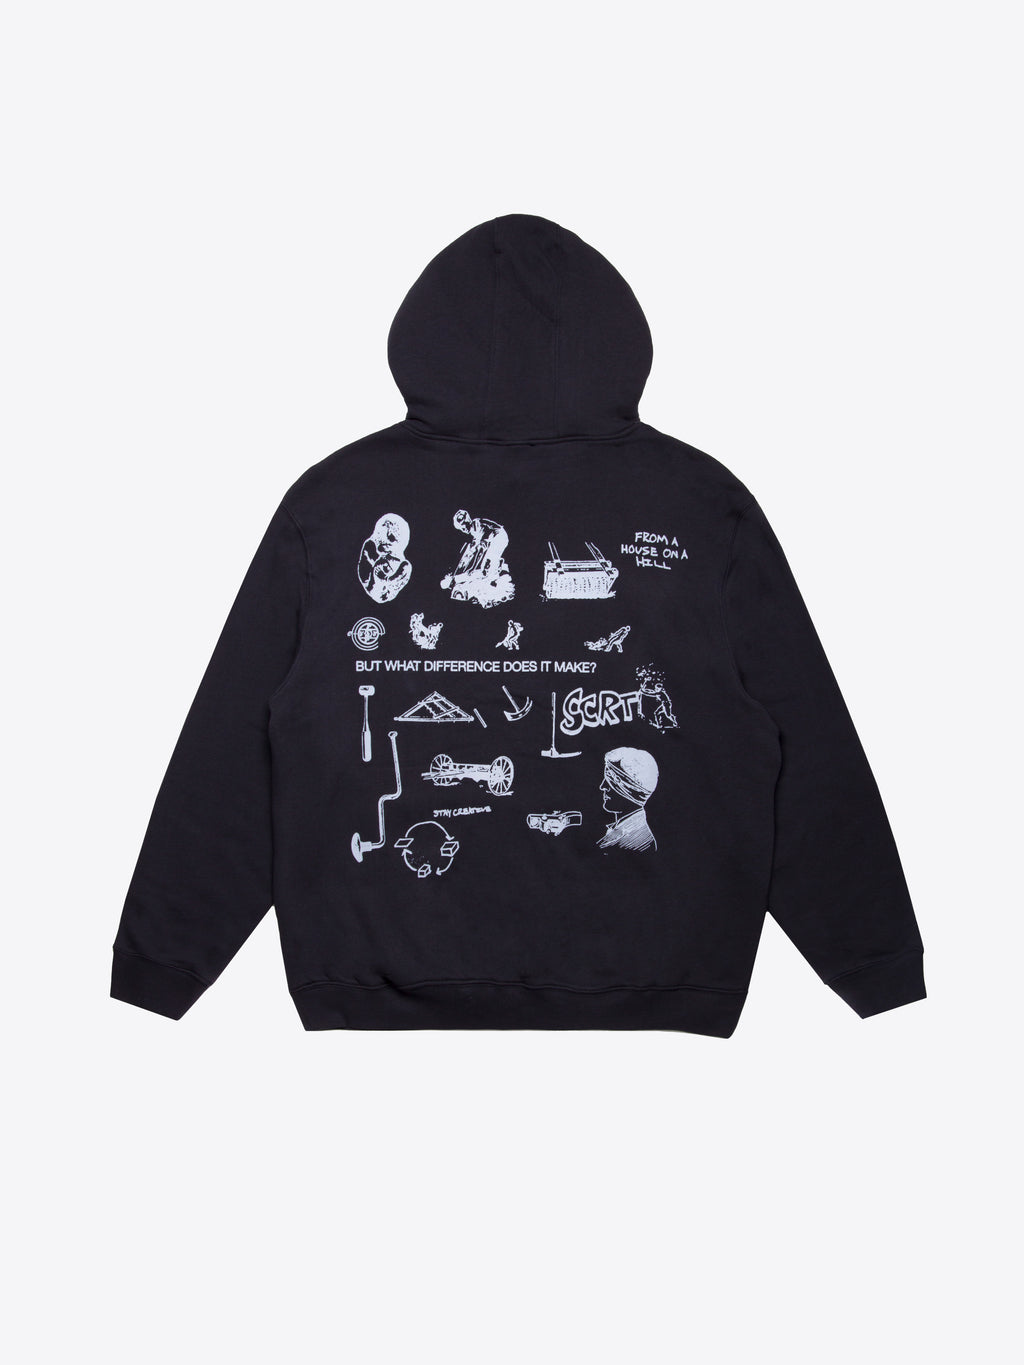 Almost There Hoodie - Dark Navy